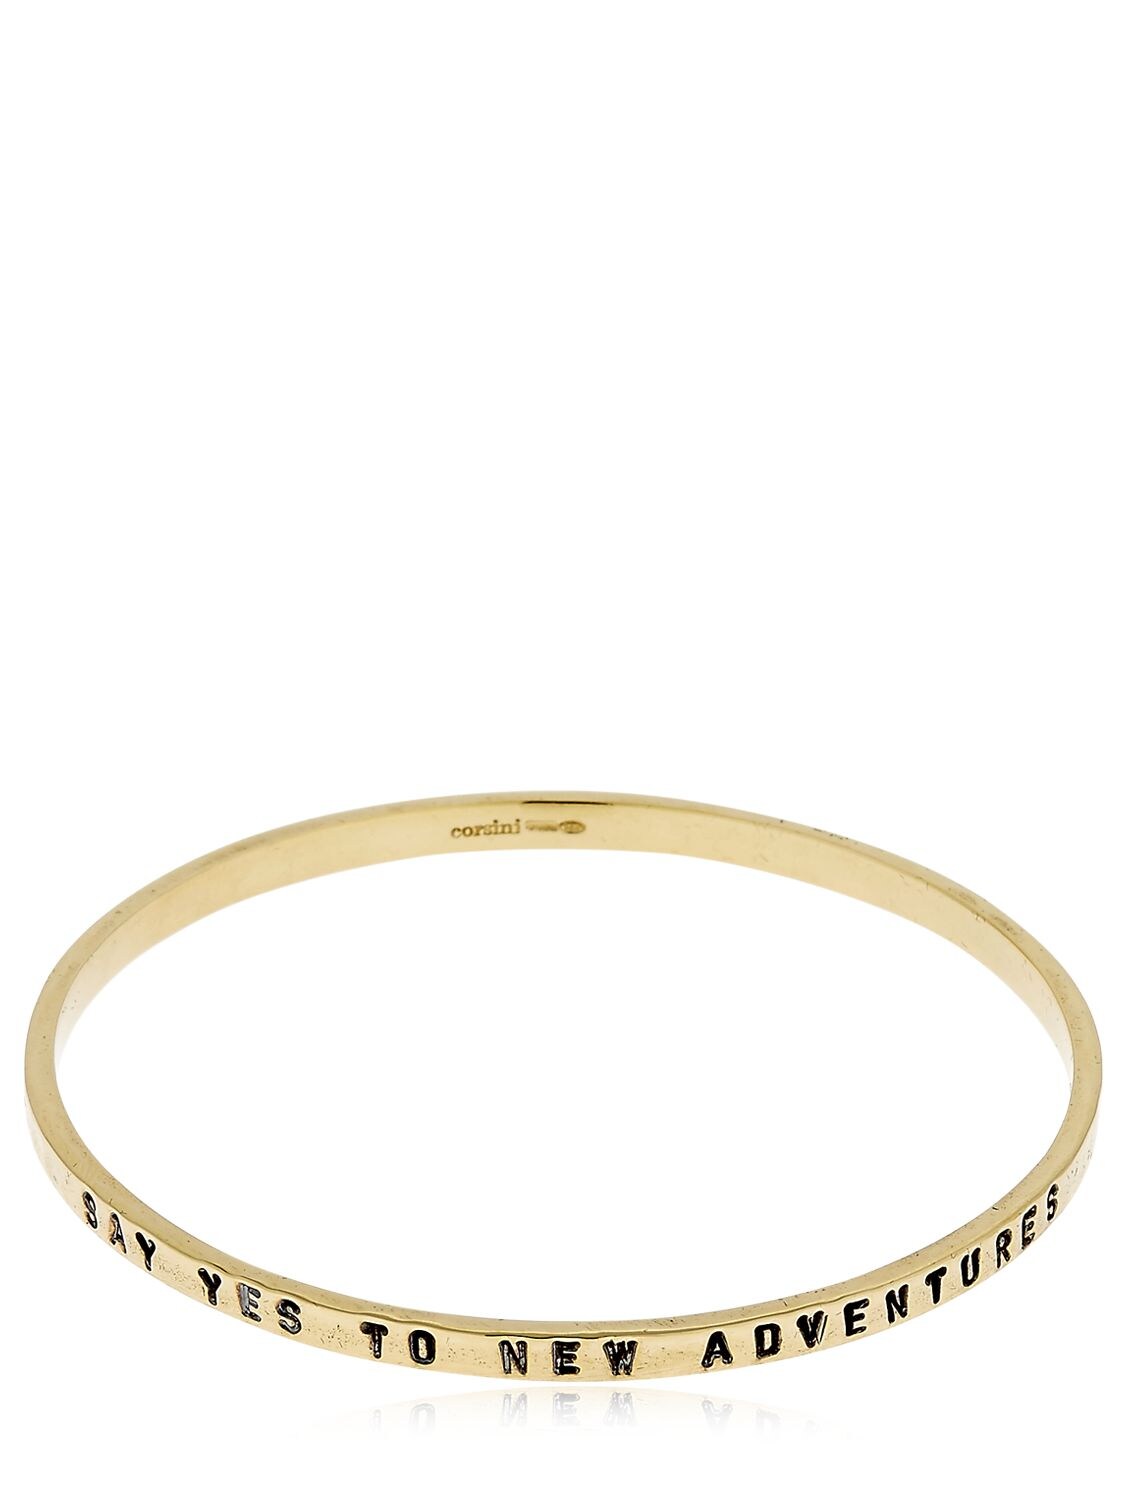 Gioielli Corsini Say Yes To New Adventures Bracelet In Gold